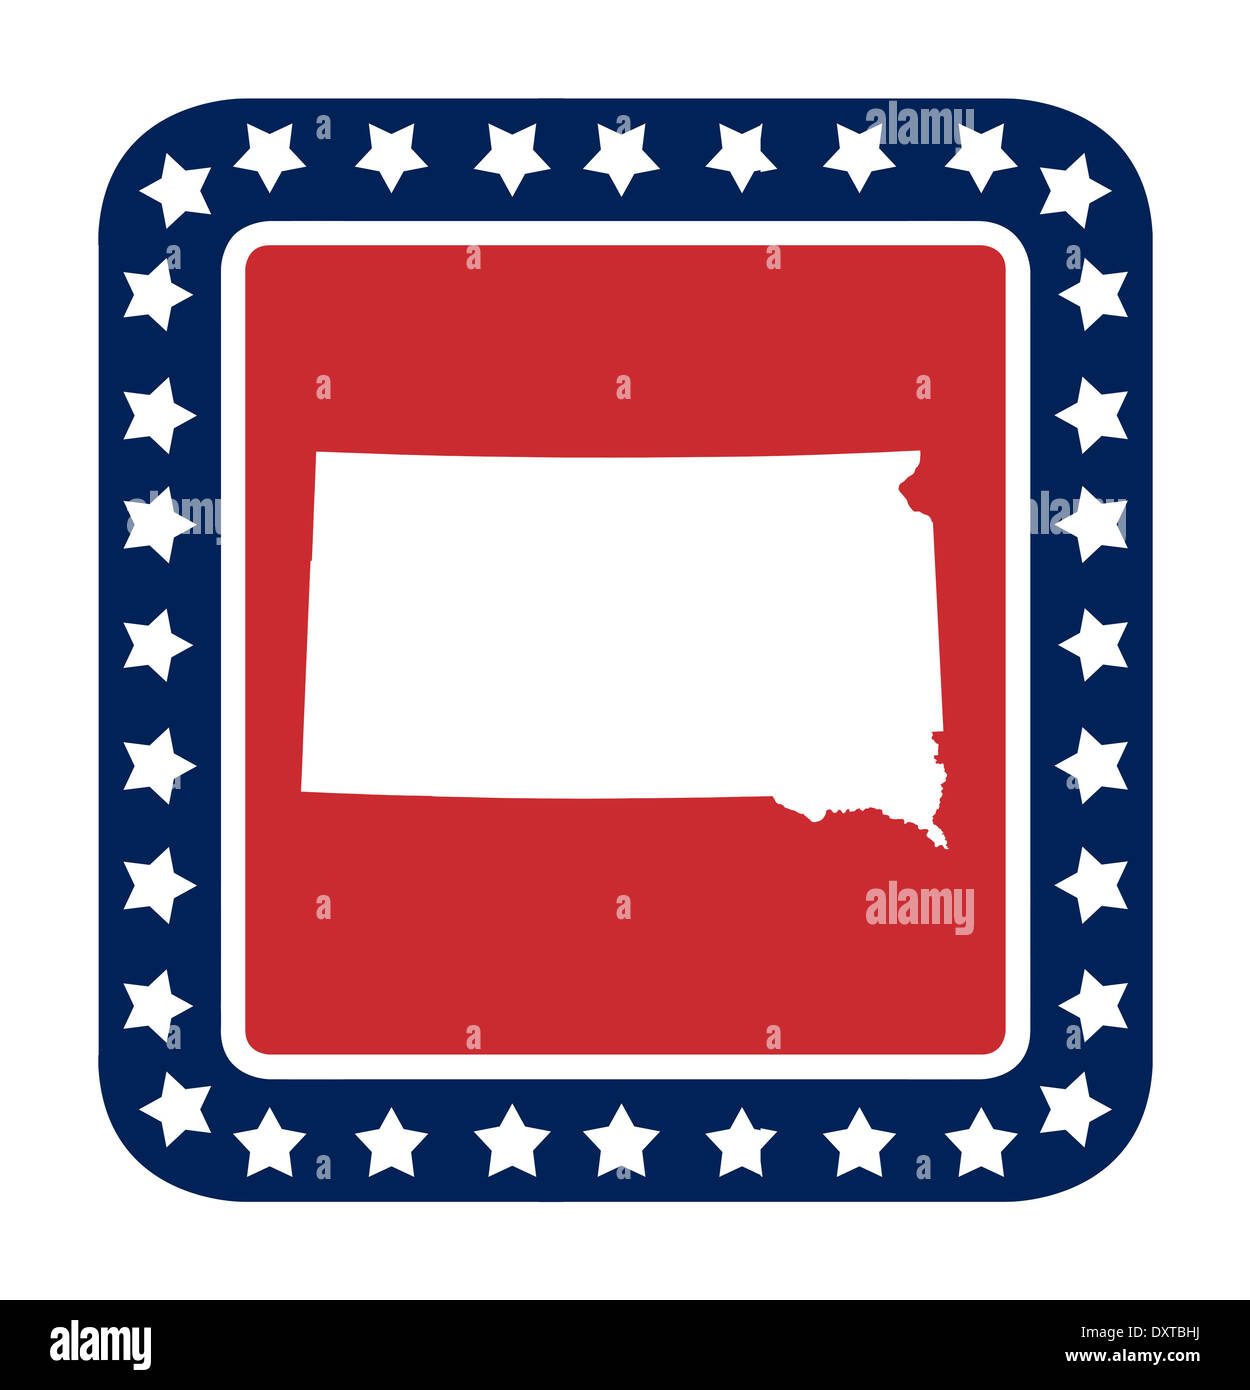 South Dakota state button on American flag in flat web design style, isolated on white background. Stock Photo